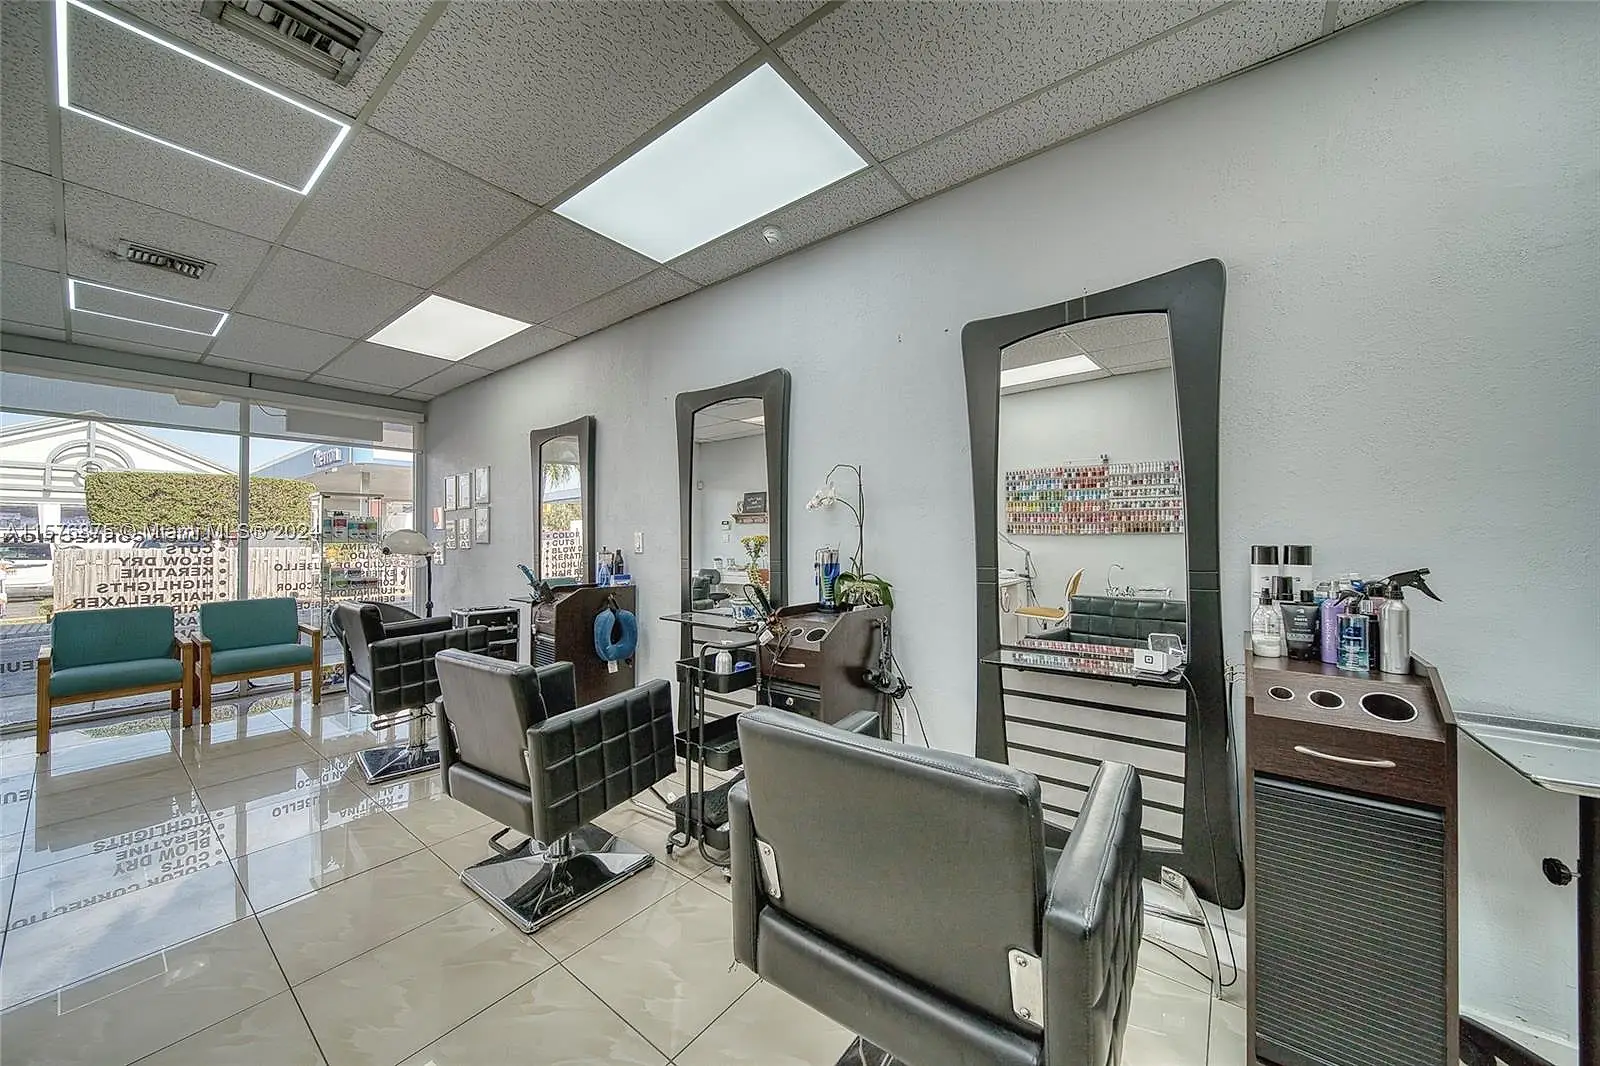 Beauty Salon/Barbershop For Sale On 107 And Bird Road